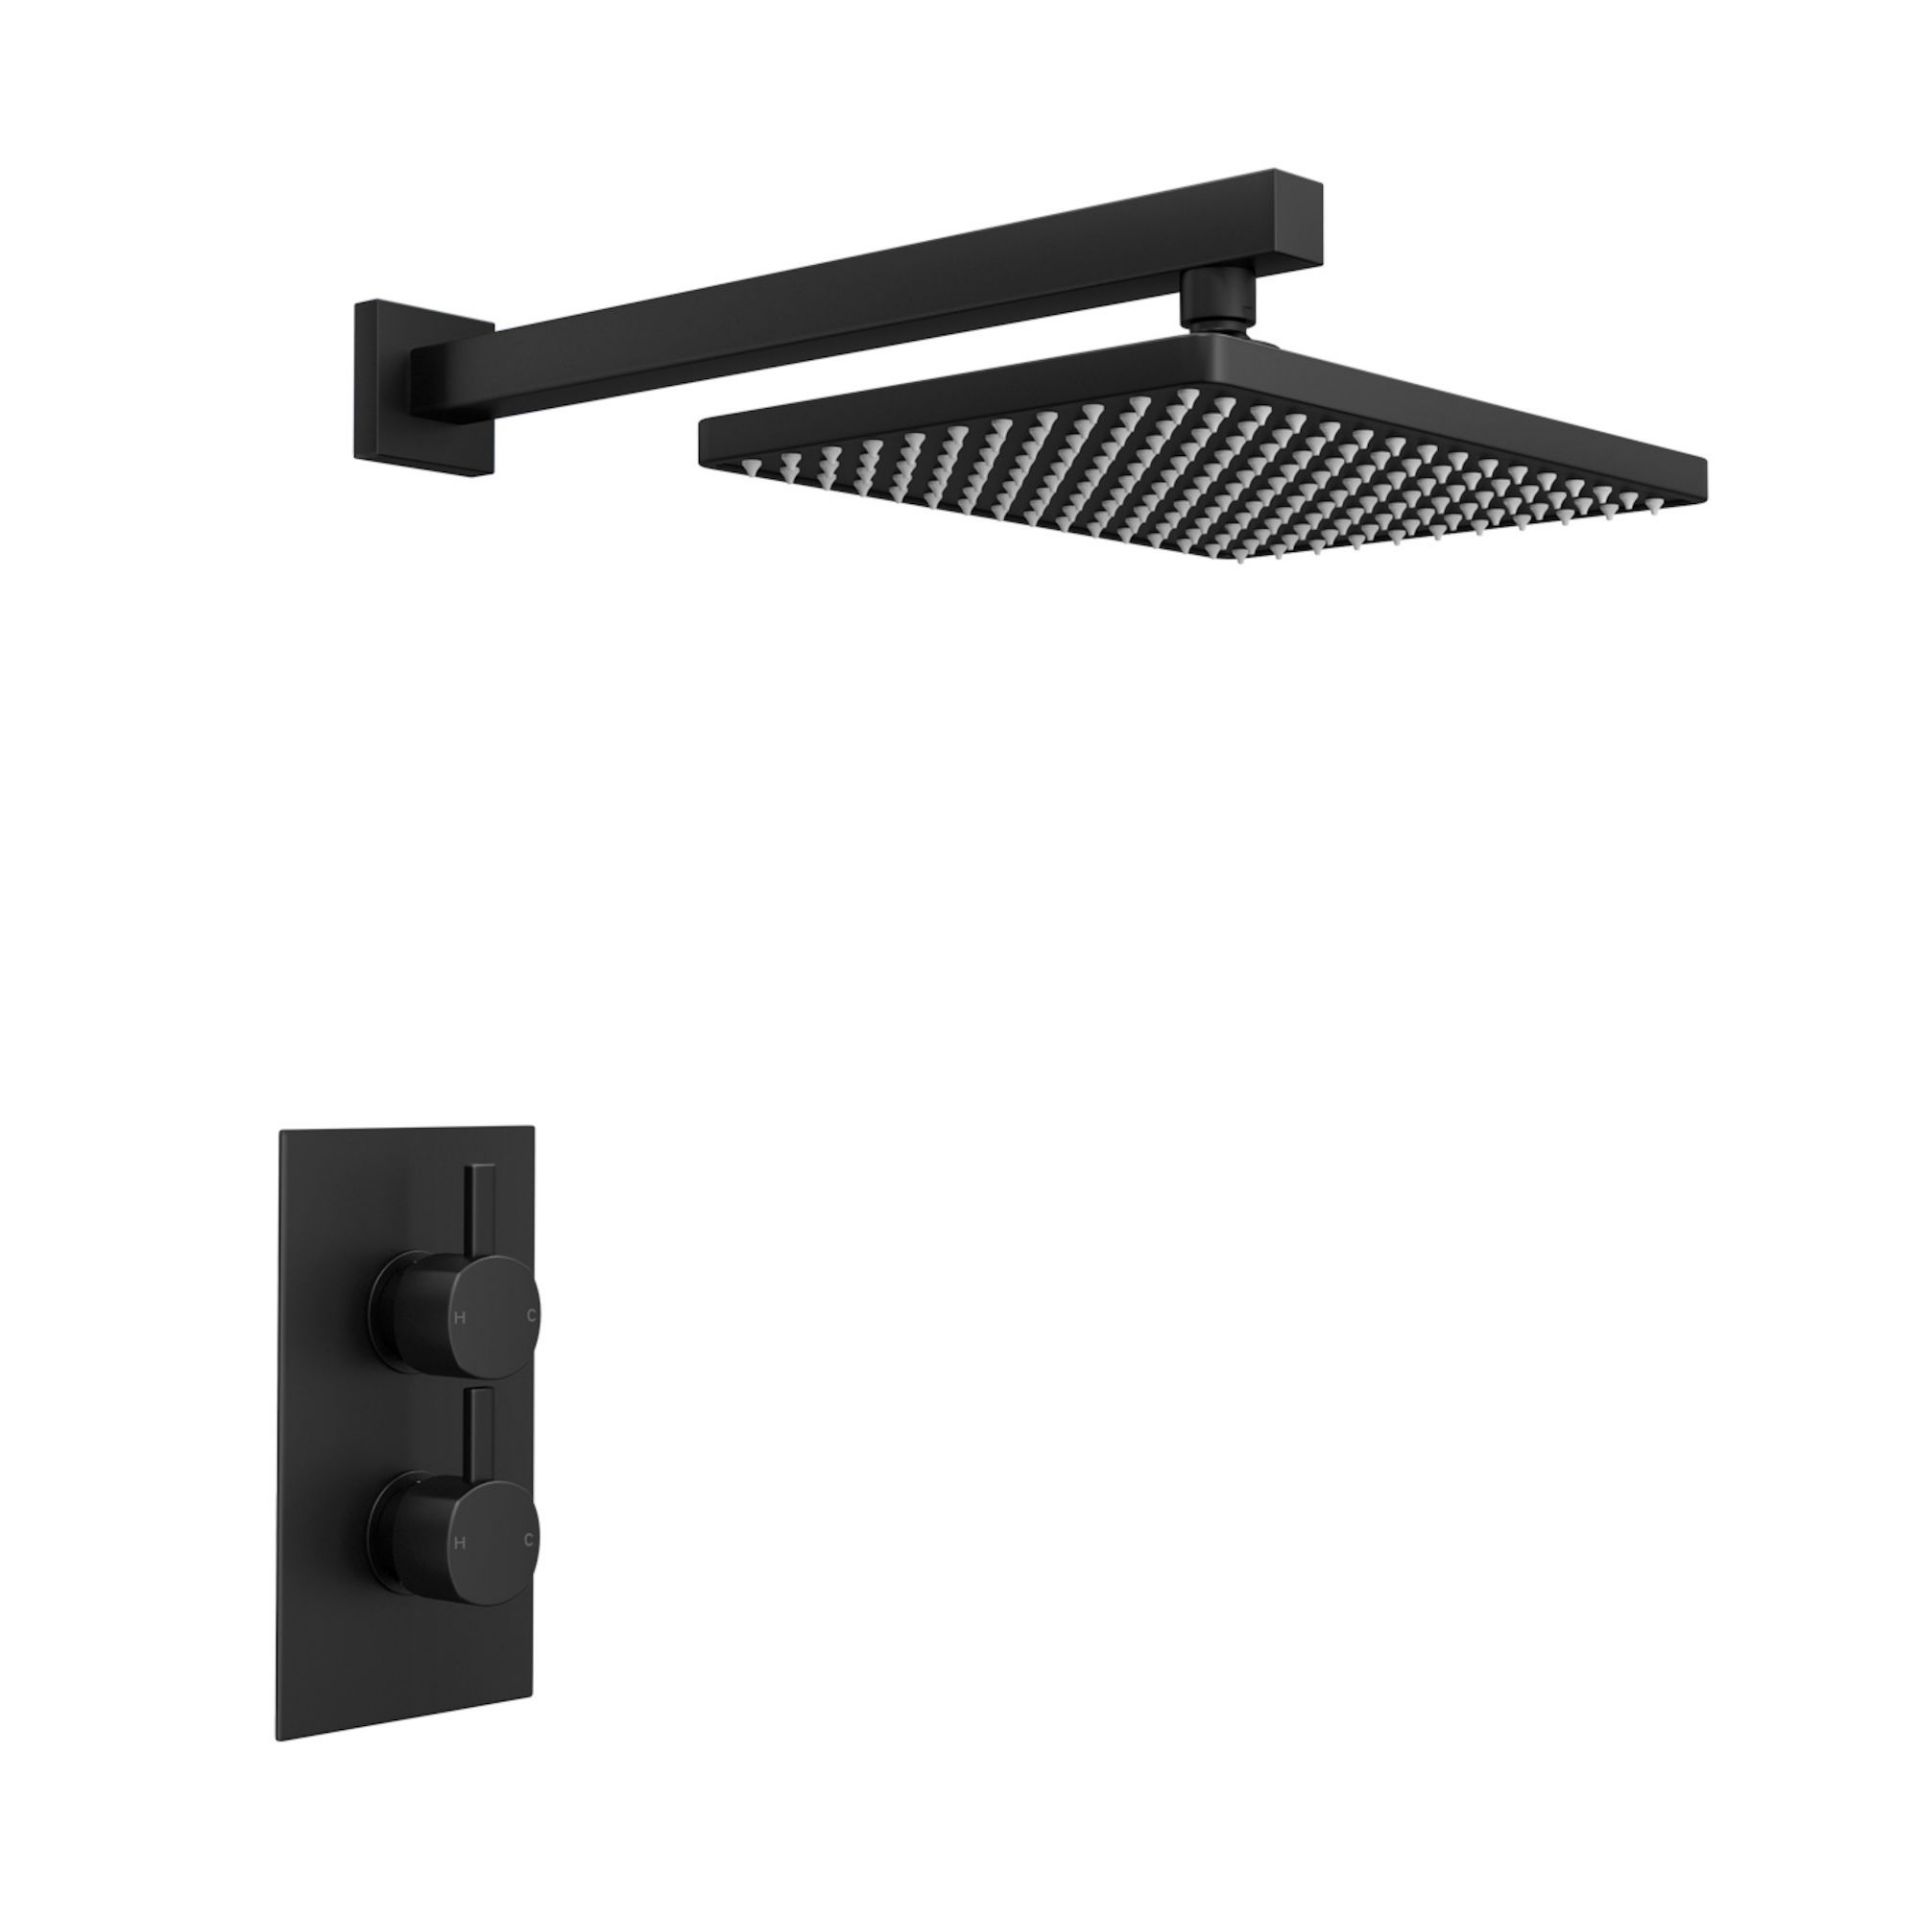 (OS124) Iker Matte Black Shower. Introducing The Hotel Collection - Everyday Eclectic Luxurious - Image 2 of 3